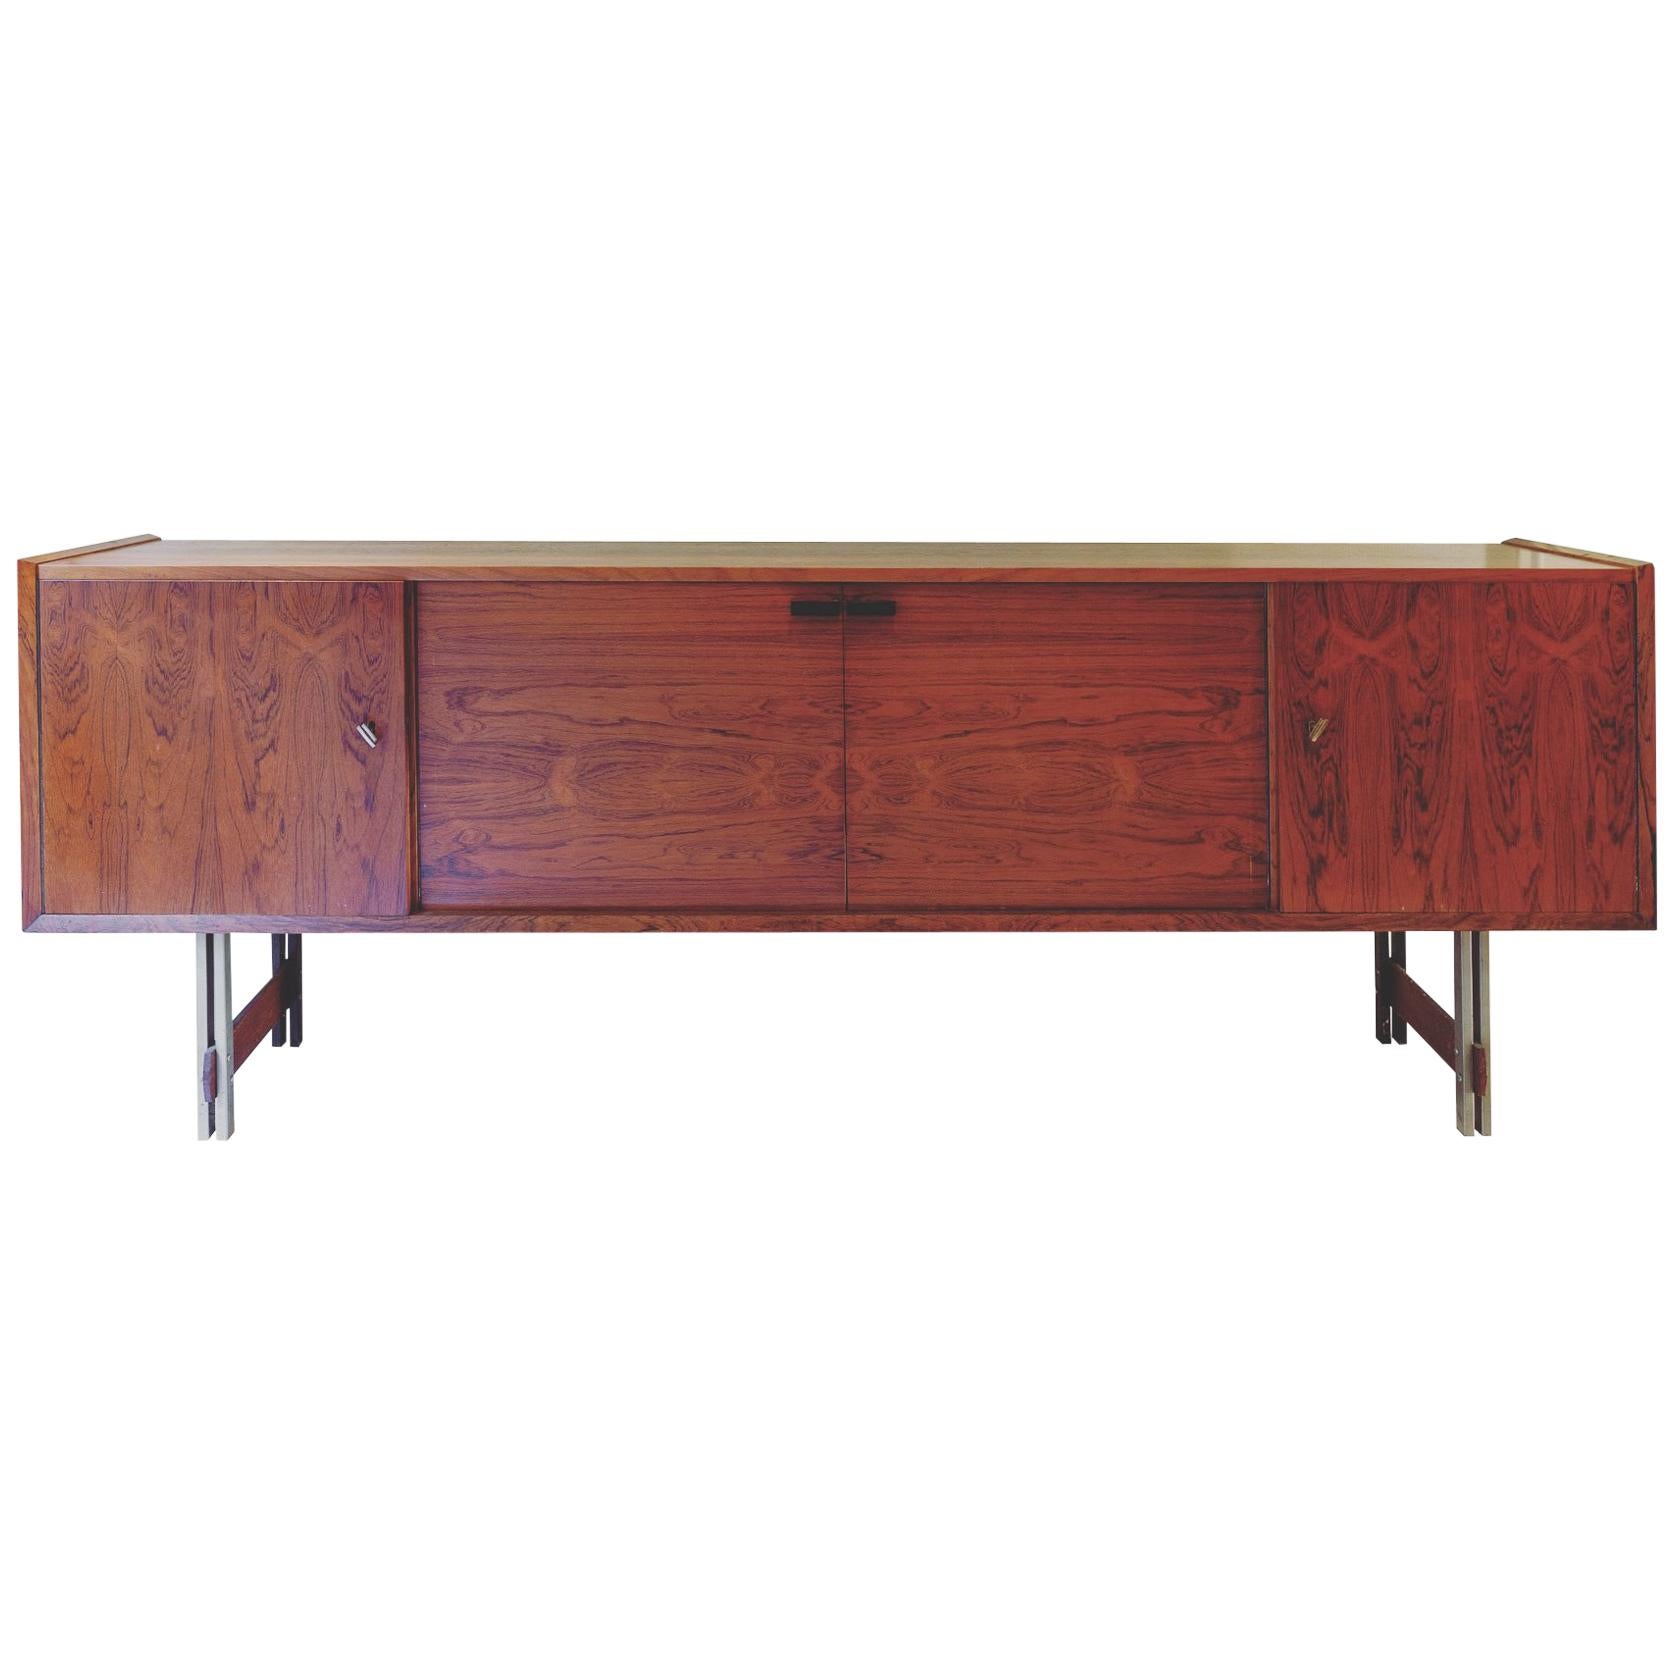  Ico Parisi Side-Board Mid-Century Modern Production, Italy 1950-1960